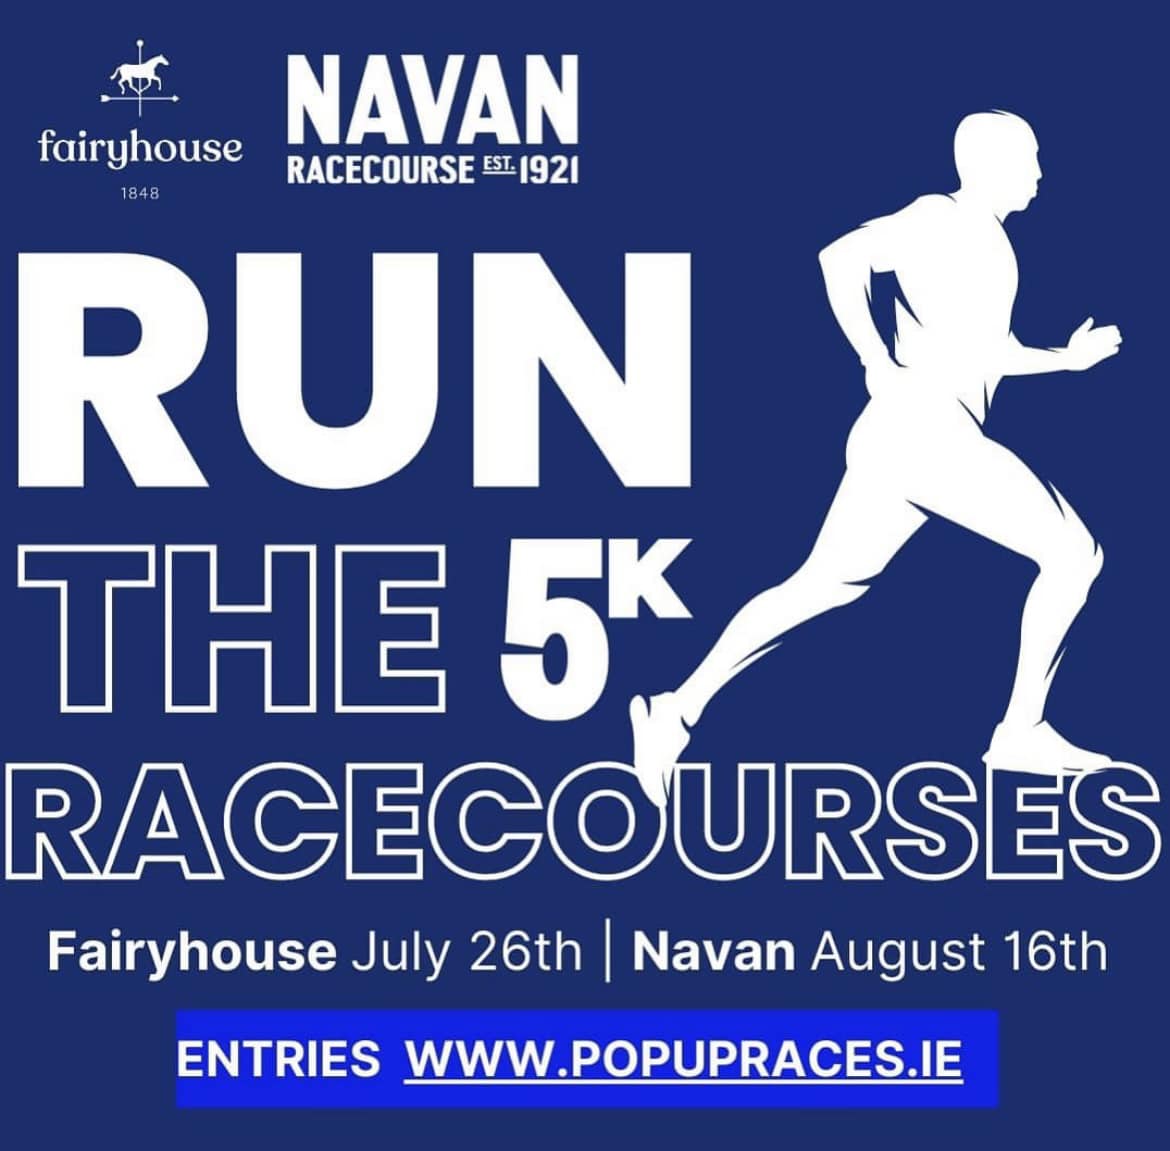 🏇🏃‍♂️Get your running shoes on and follow in the hoofprints of equine legends this summer, with 5K races @Fairyhouse Racecourse & @NavanRacecourse 🎫For entries visit 👉🏼 popupraces.ie/.../run-the-ra…... 💰A contribution from proceeds will be donated to us at Irish Injured Jockeys